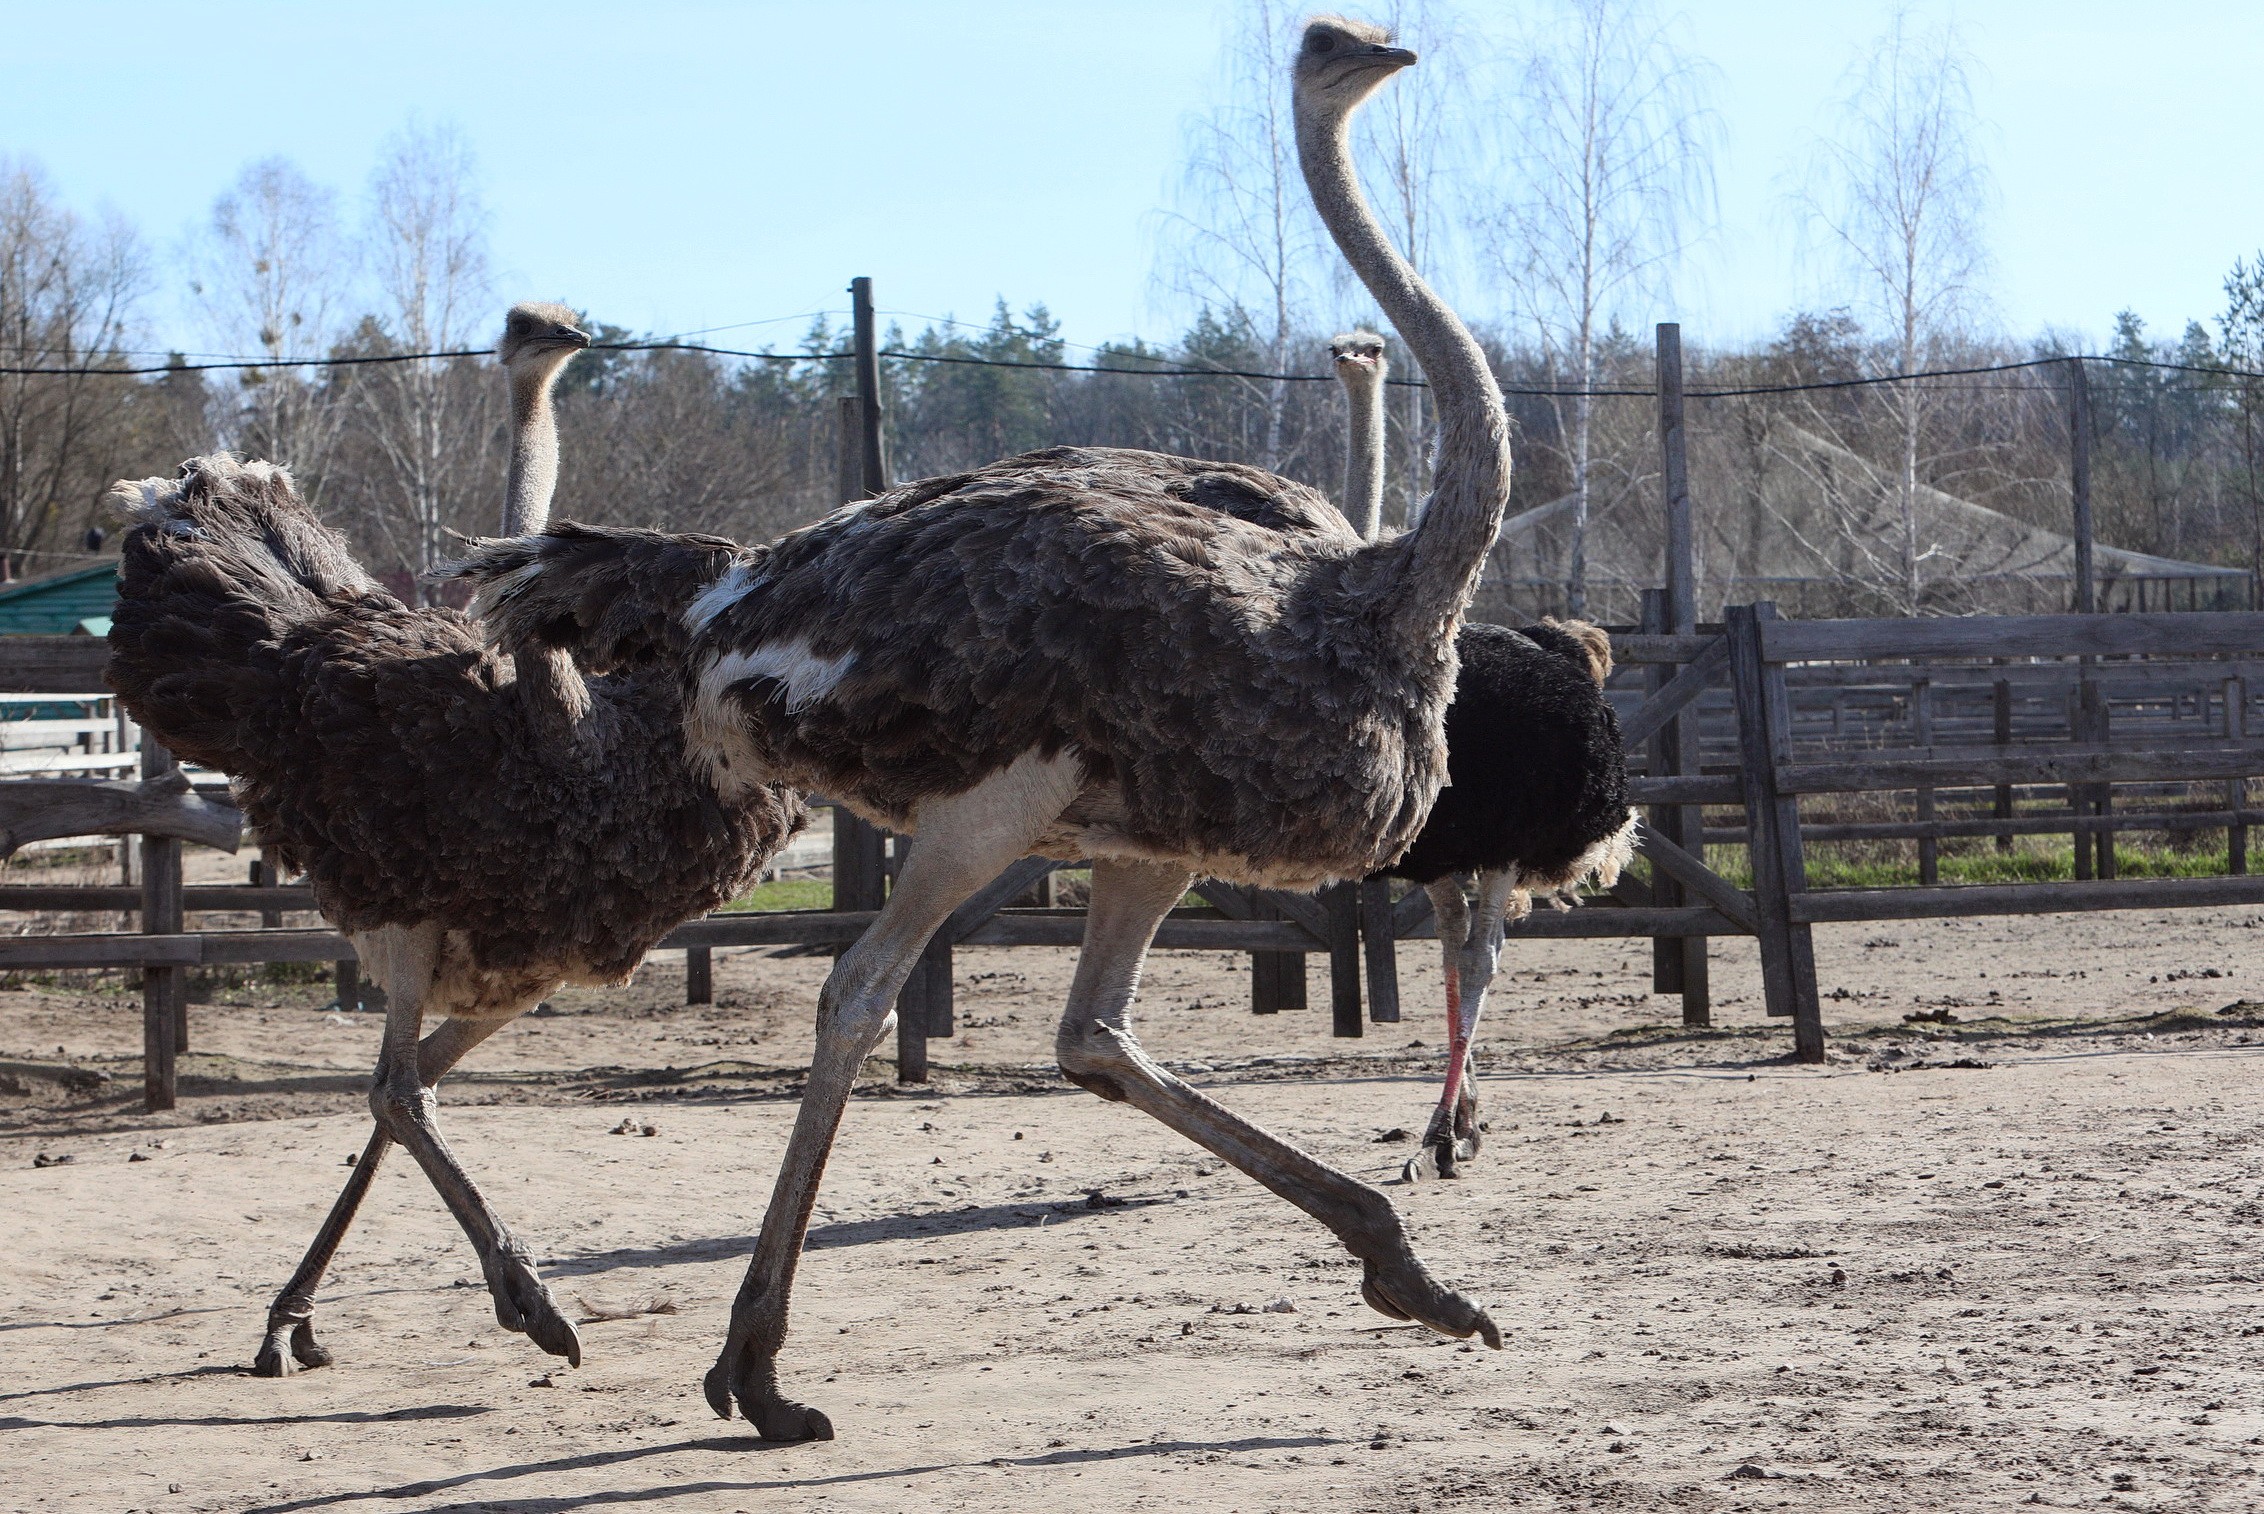 Ostriches run in one of the pens at the Ostrich Valley commercial farm in Yasnohorodka village of Kyiv Oblast ( by Volodymyr Petrov)